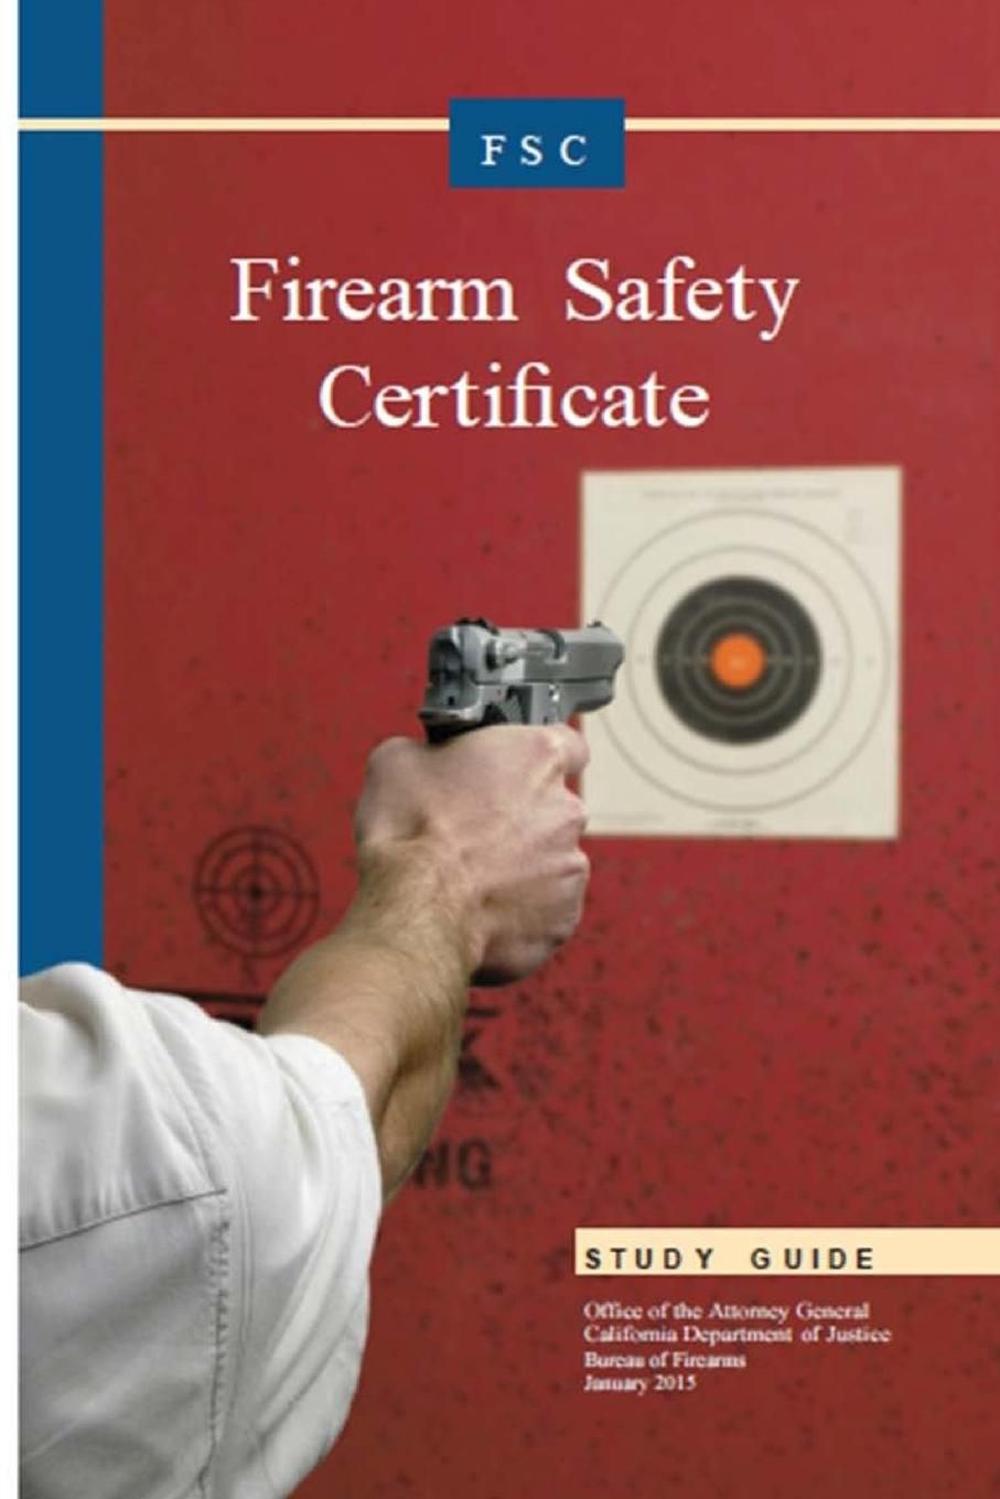 Firearm Safety Certificate Studgy Guide by California Department Of